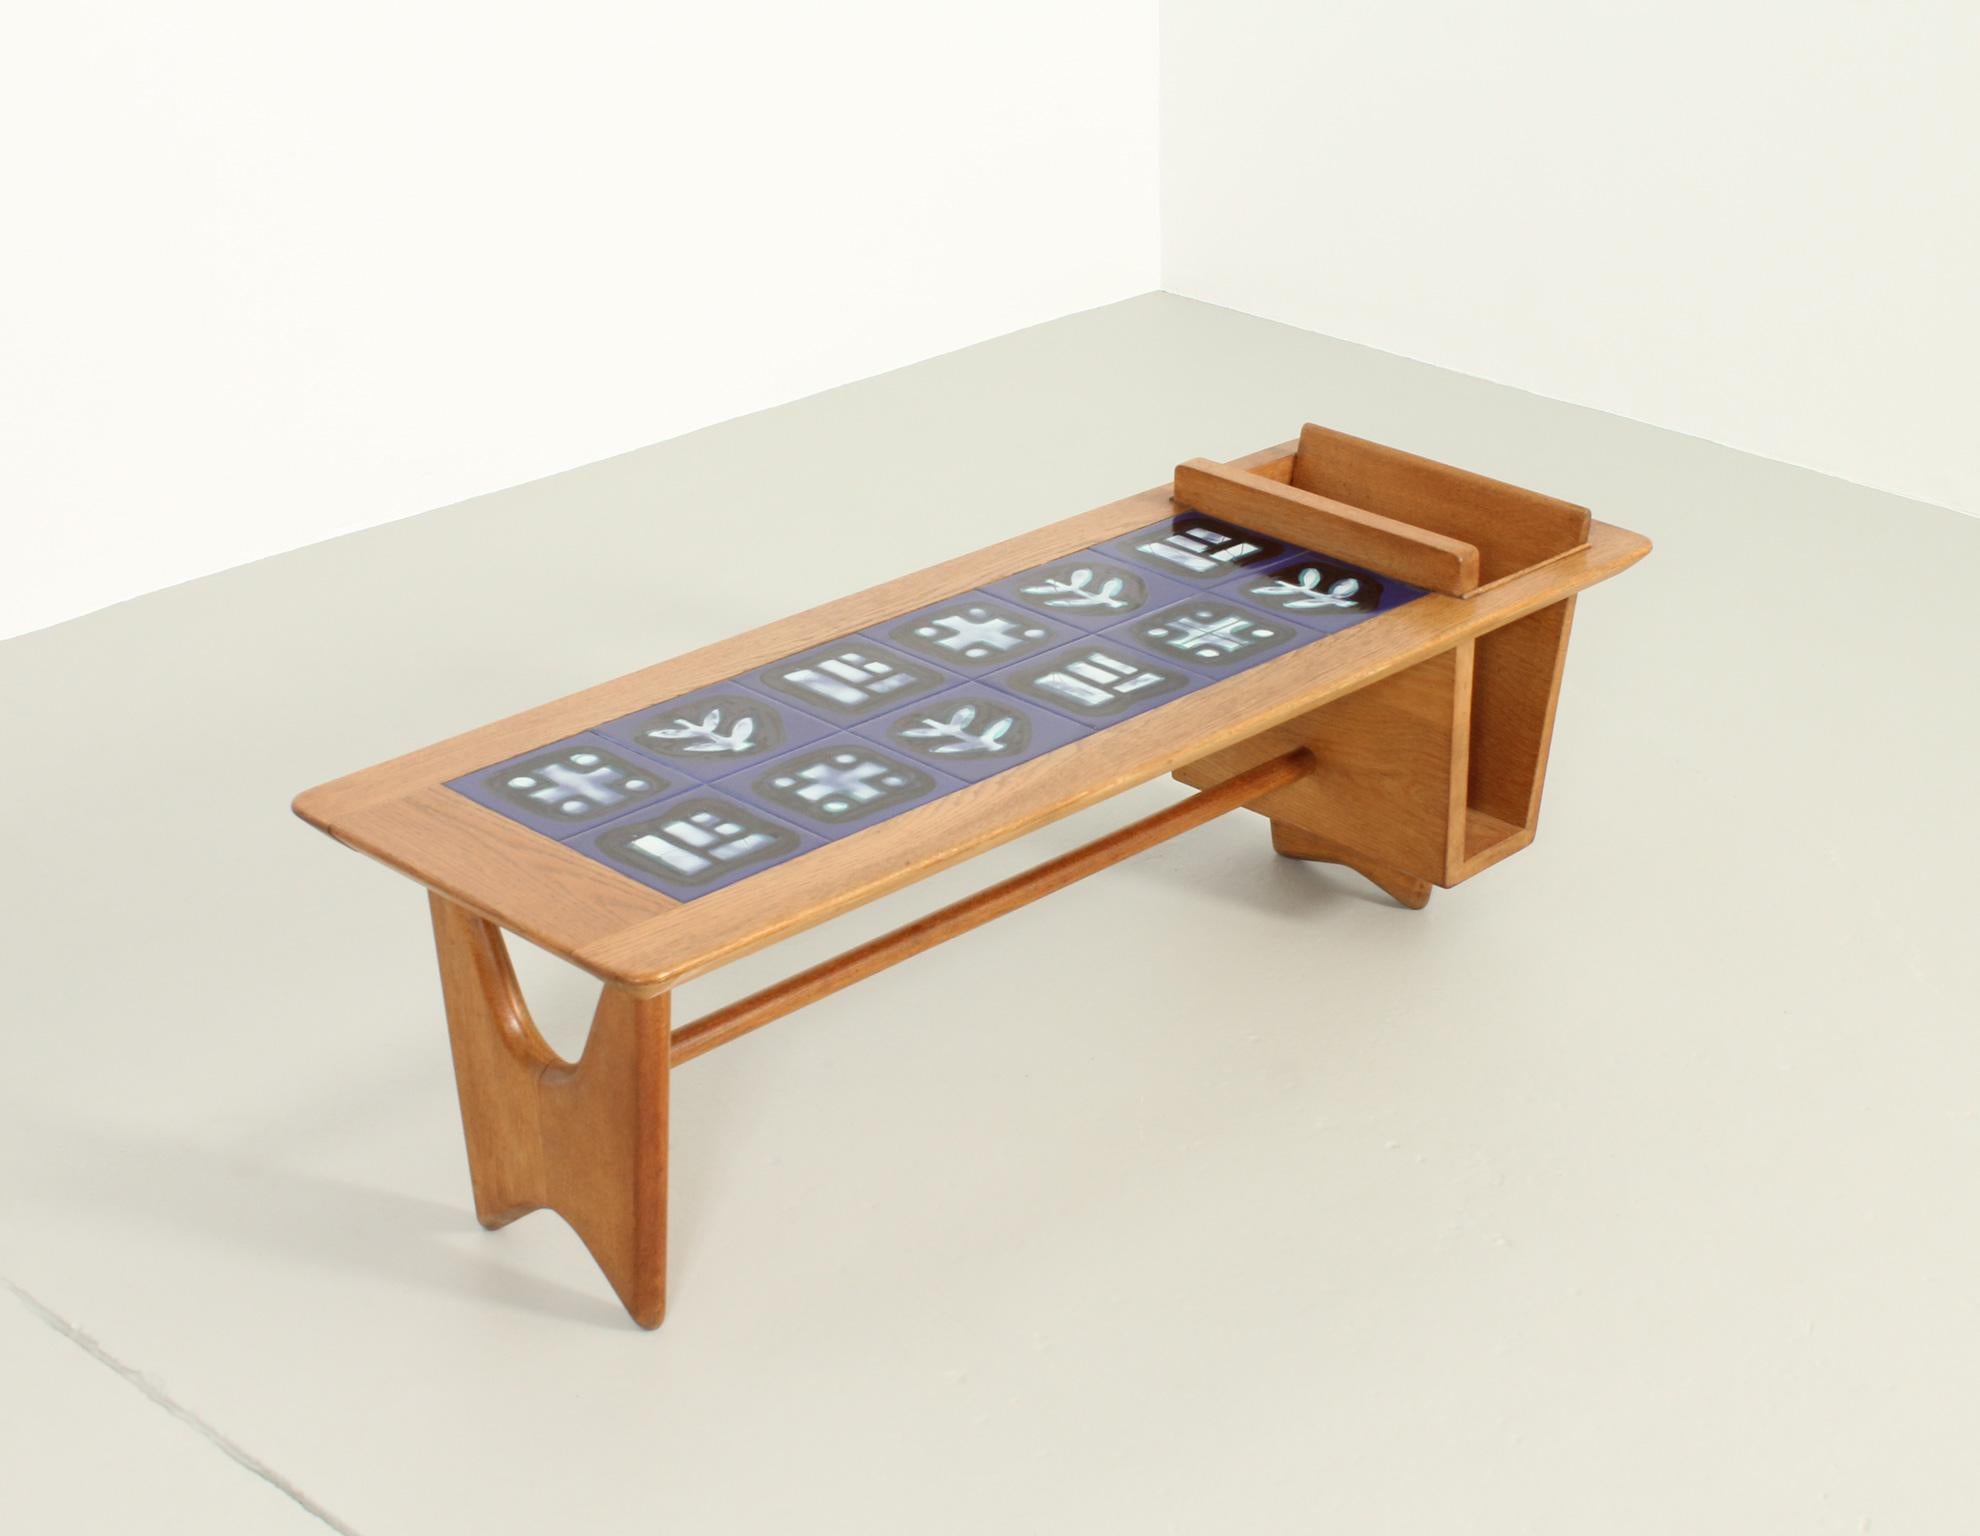 Coffee table model Thibault designed in 1960 by Robert Guillerme and Jacques Chambron for Votre Maison, France. Solid oak wood and ceramic tiles by Boleslaw Danikowski with magazine rack on one side.